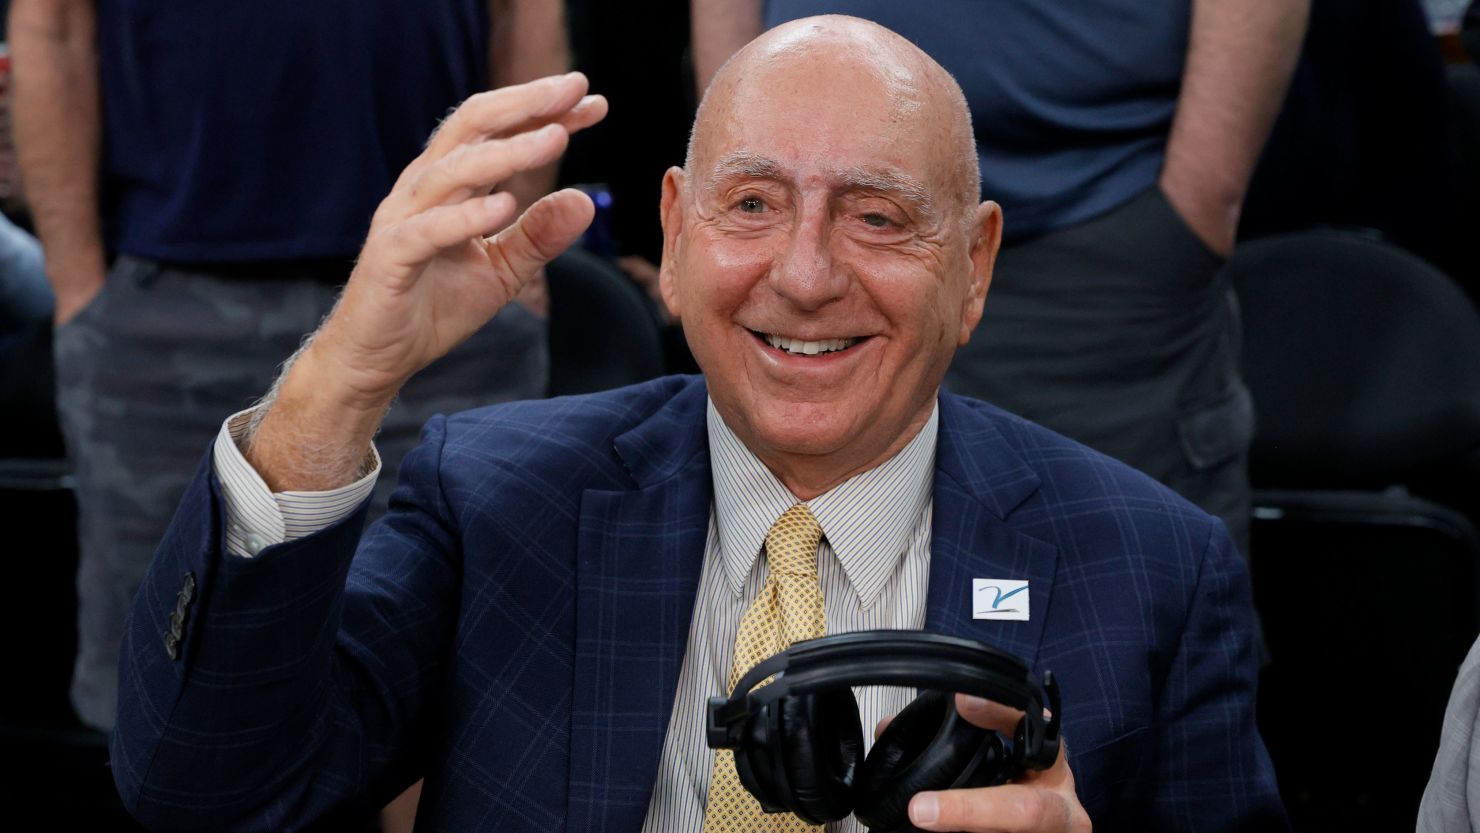 Dick Vitale salutes the crowd before calling the game between Gonzaga and UCLA.